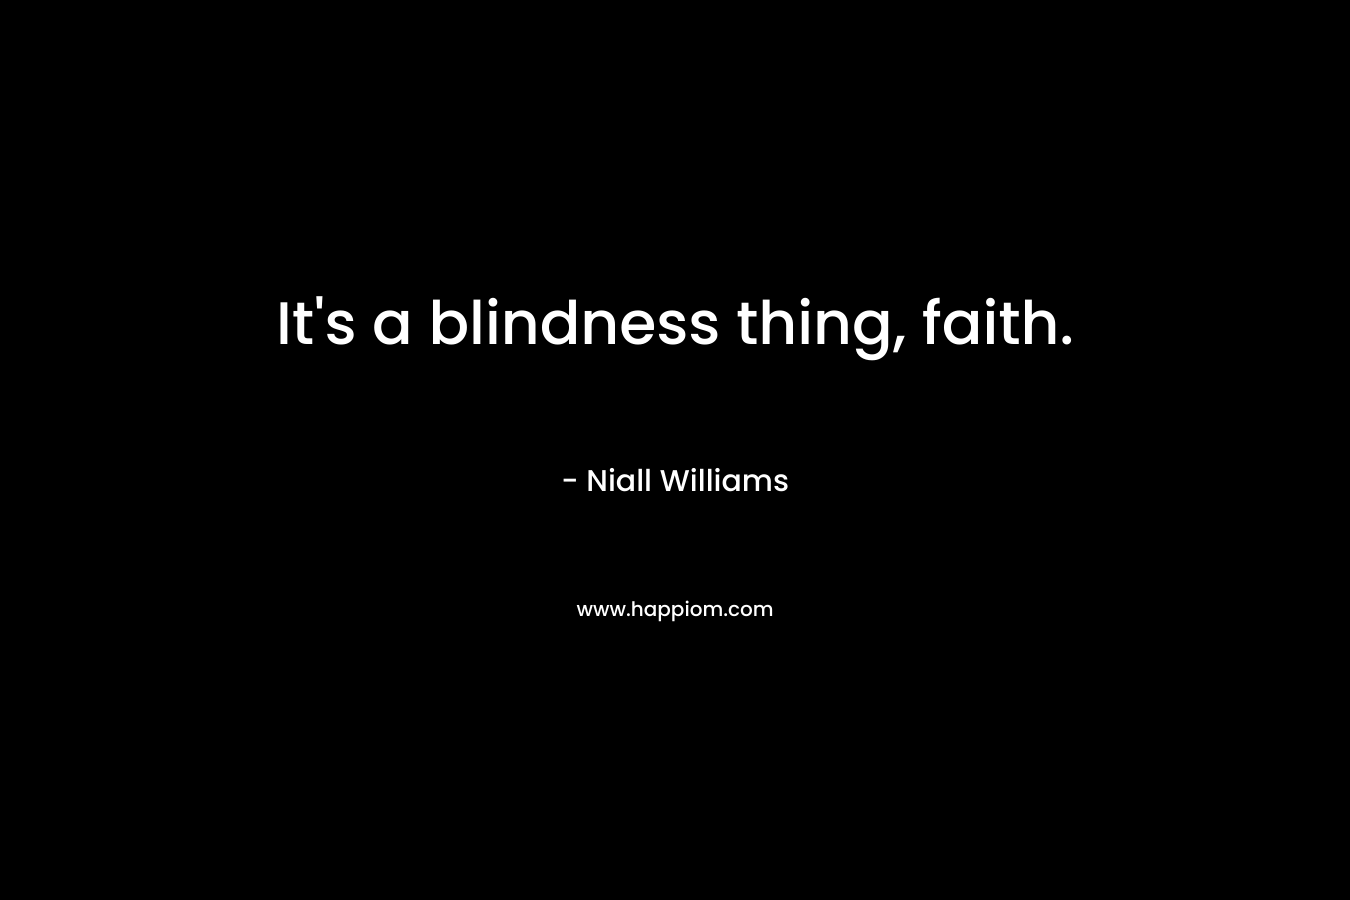 It’s a blindness thing, faith. – Niall Williams